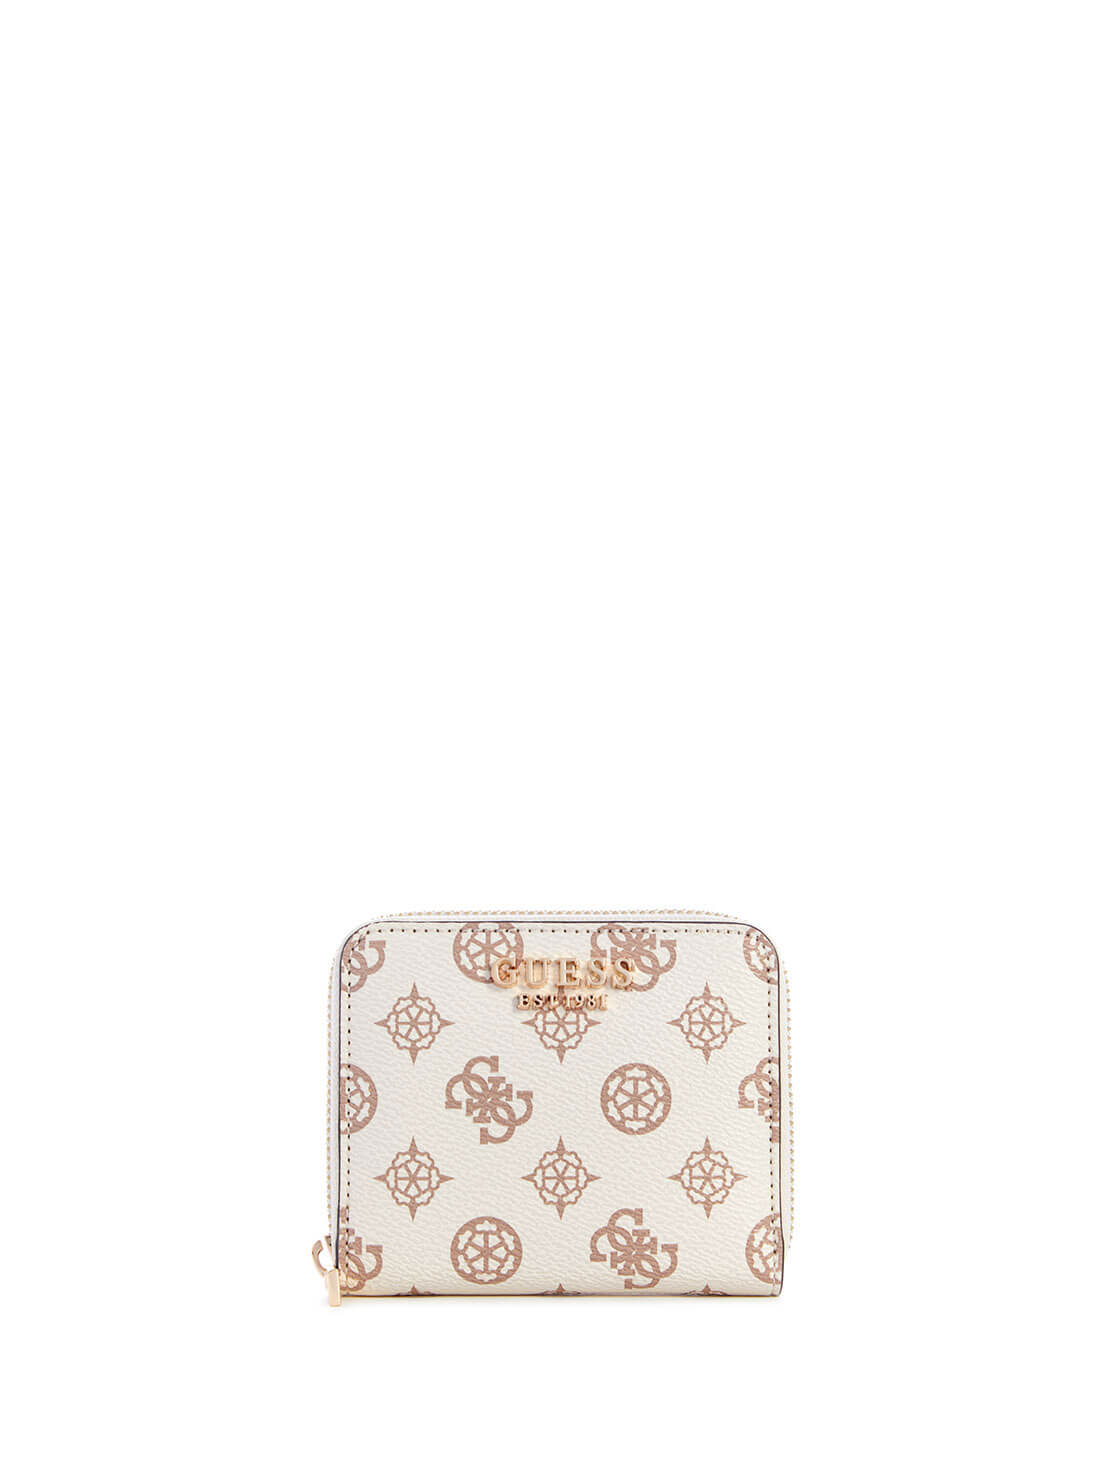 White Logo Laurel Small Wallet | GUESS Women's Handbags | front view